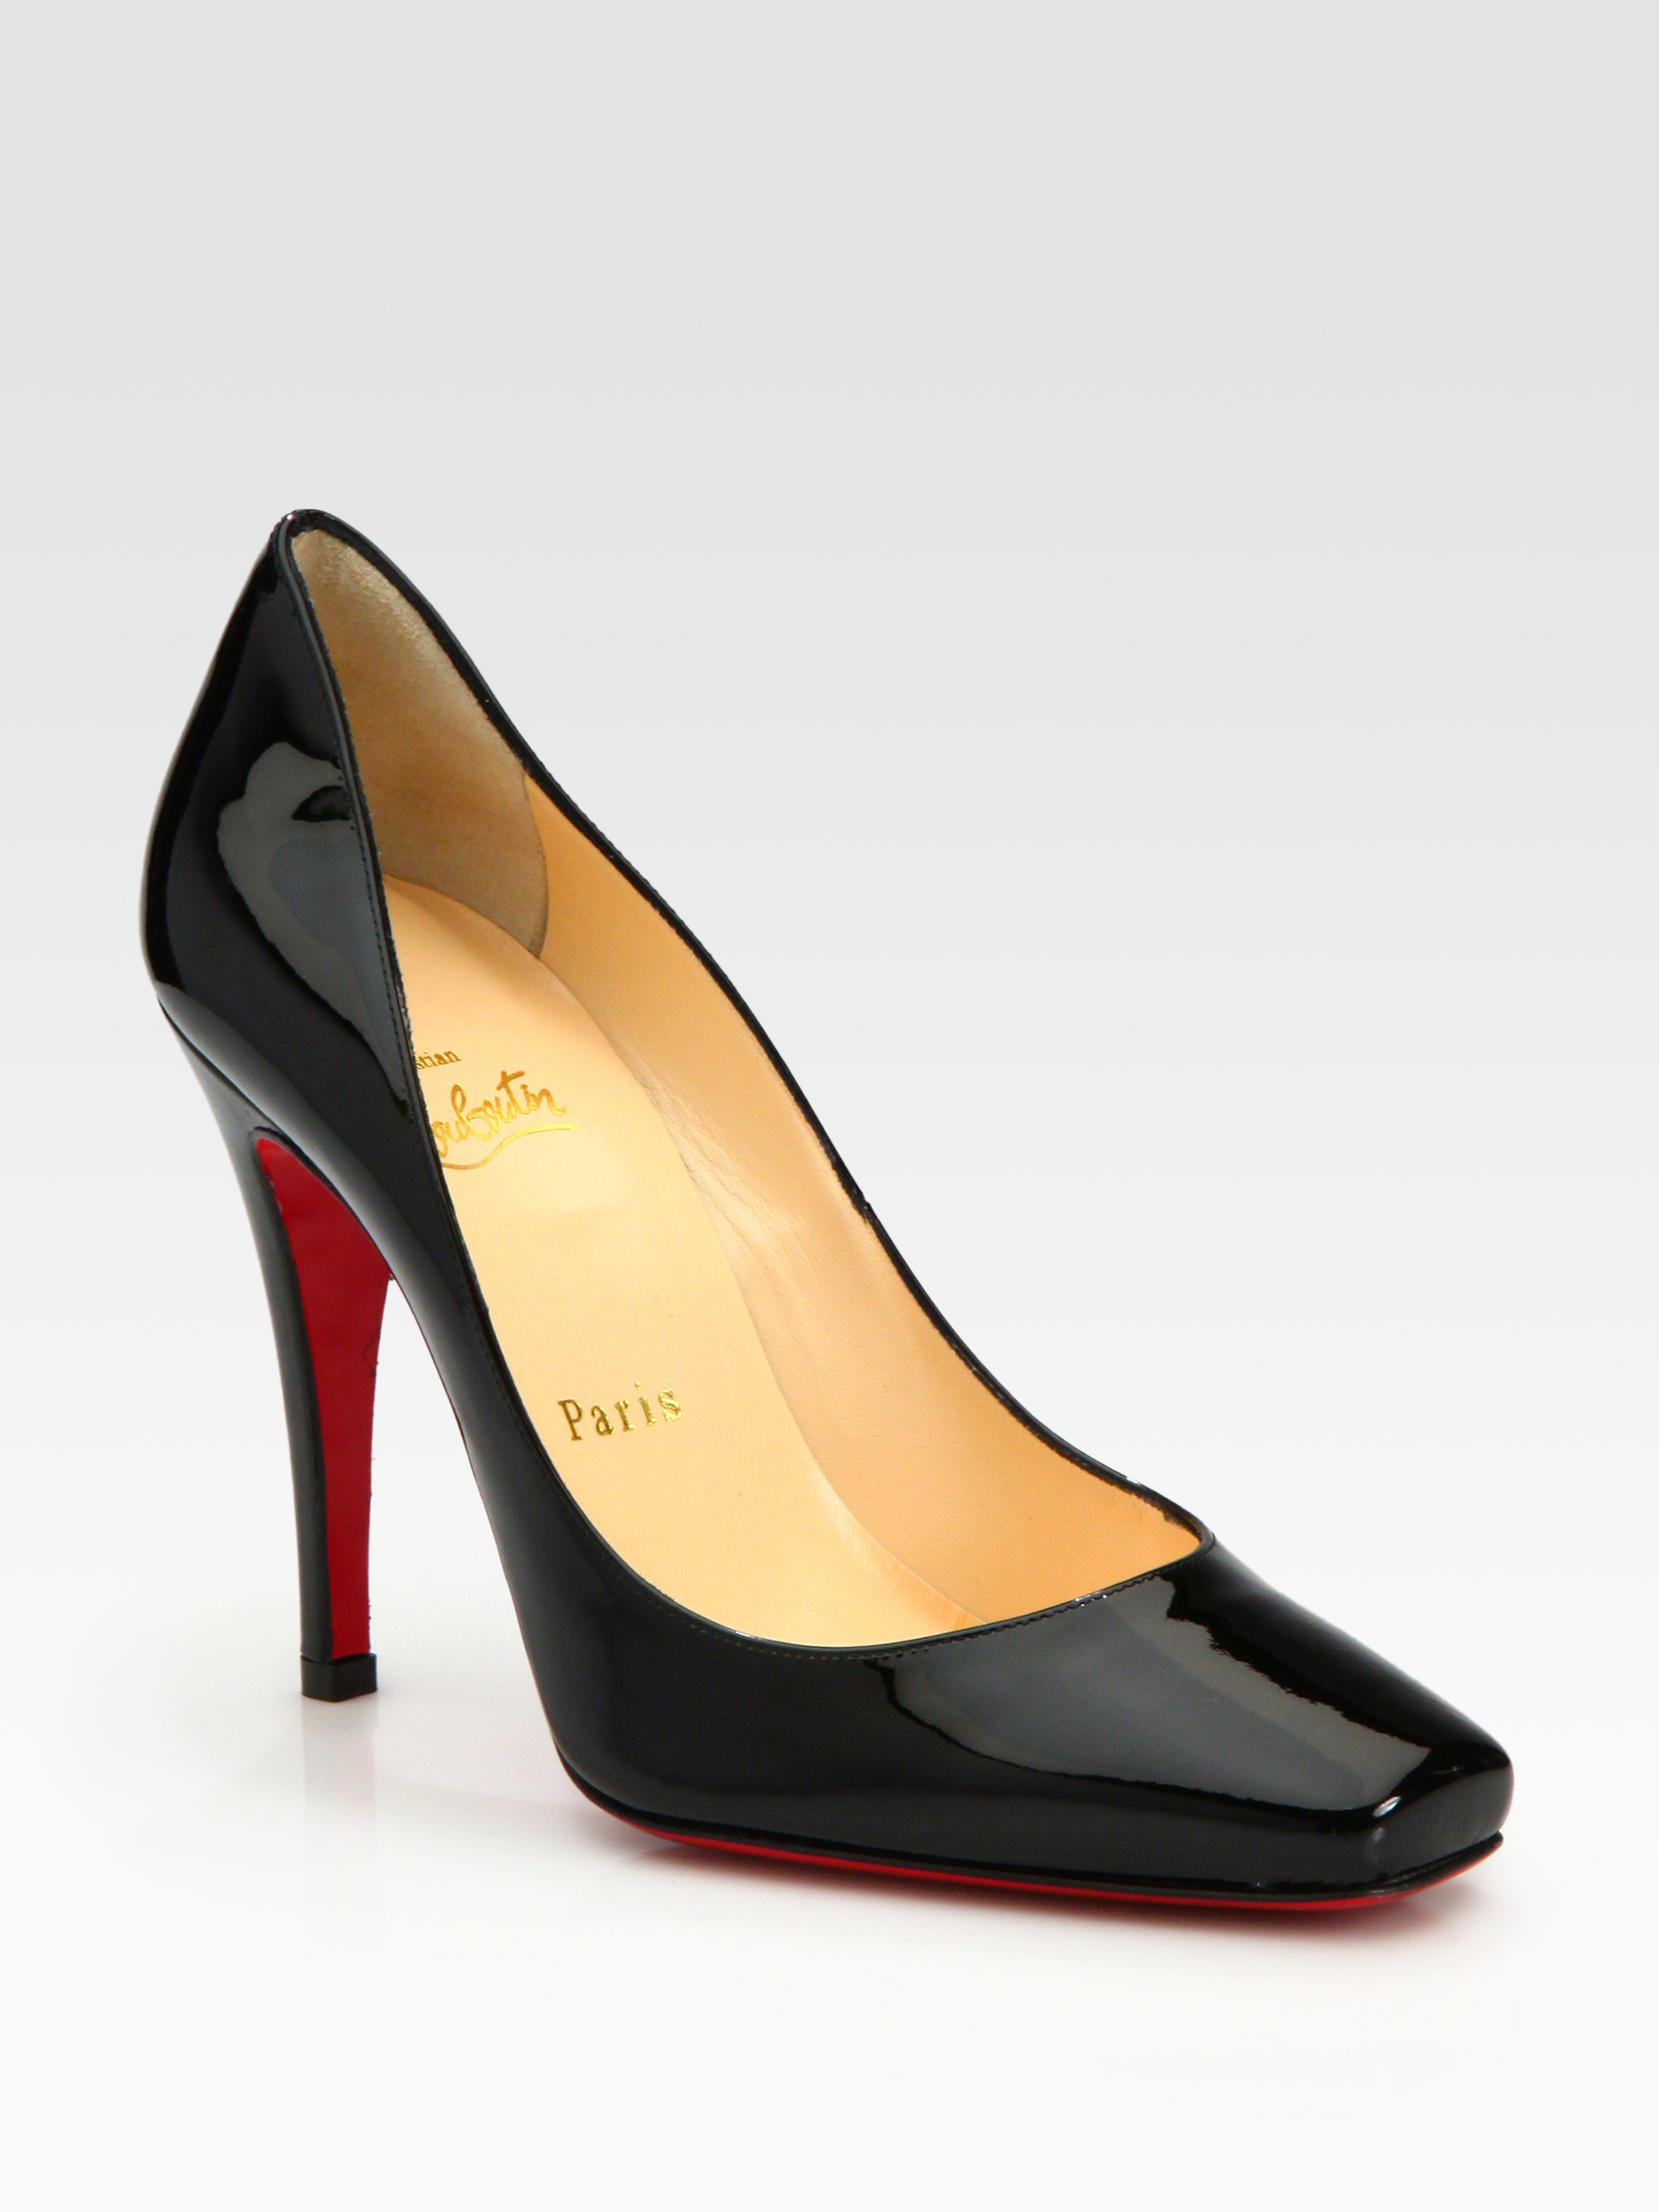 Christian Louboutin Particule Patent Leather Pumps in Black | Lyst